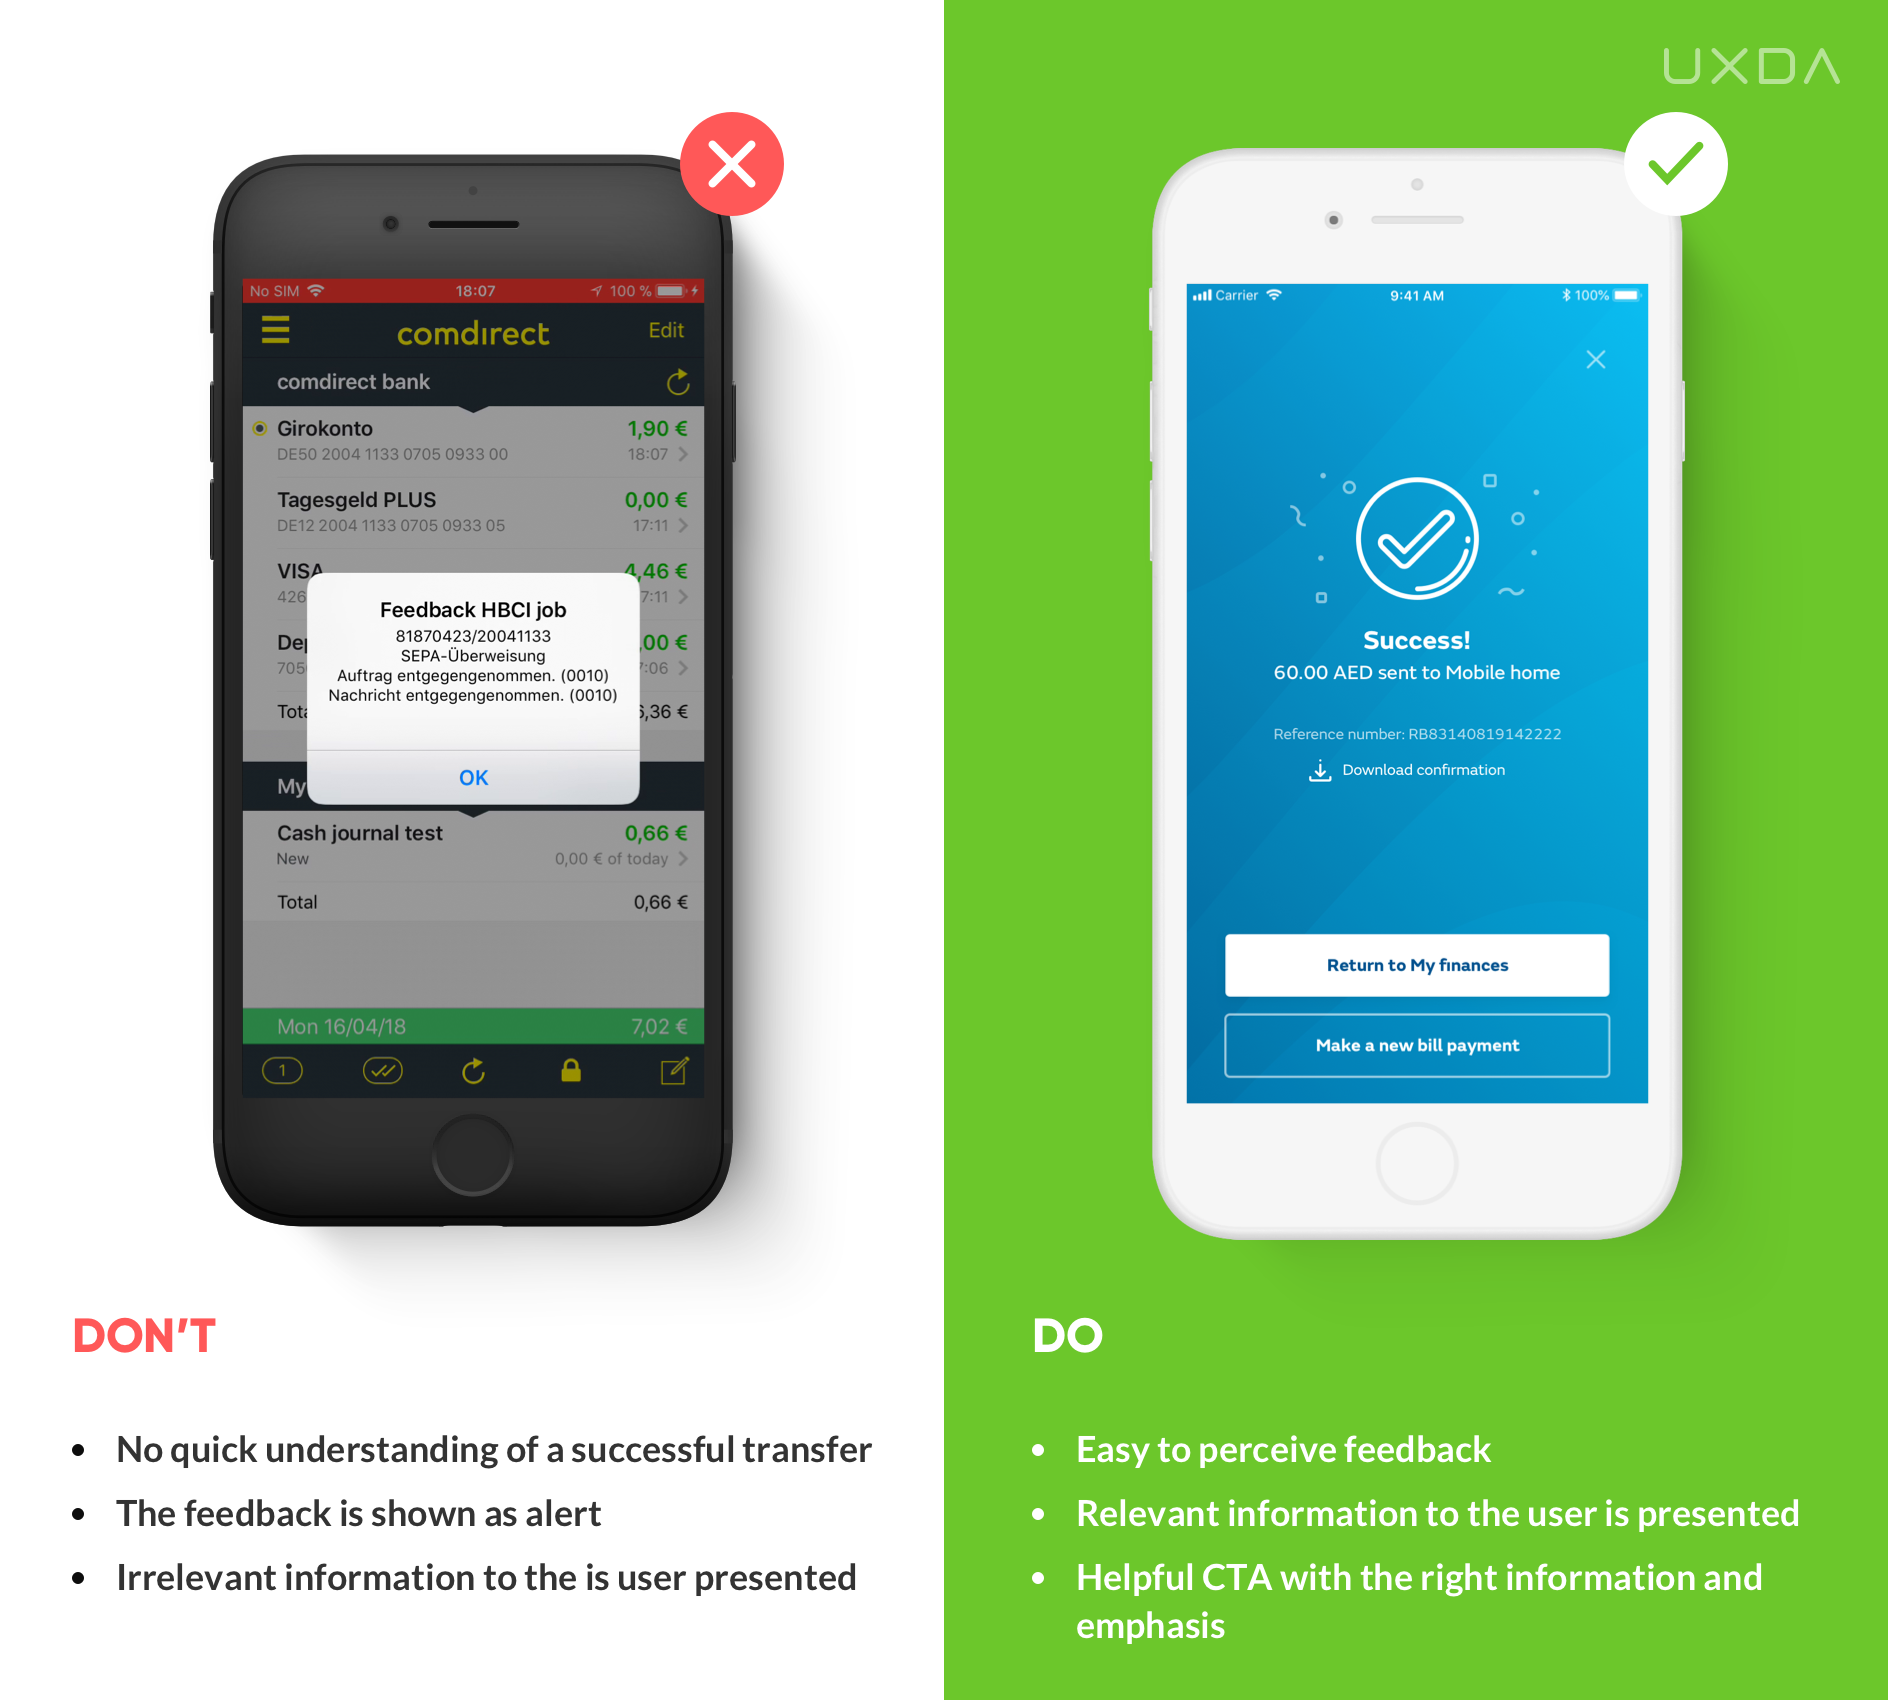 Fintech UX / UI Guide: TOP 20 Tips to Improve Mobile Banking Solutions Design - Clear feedback